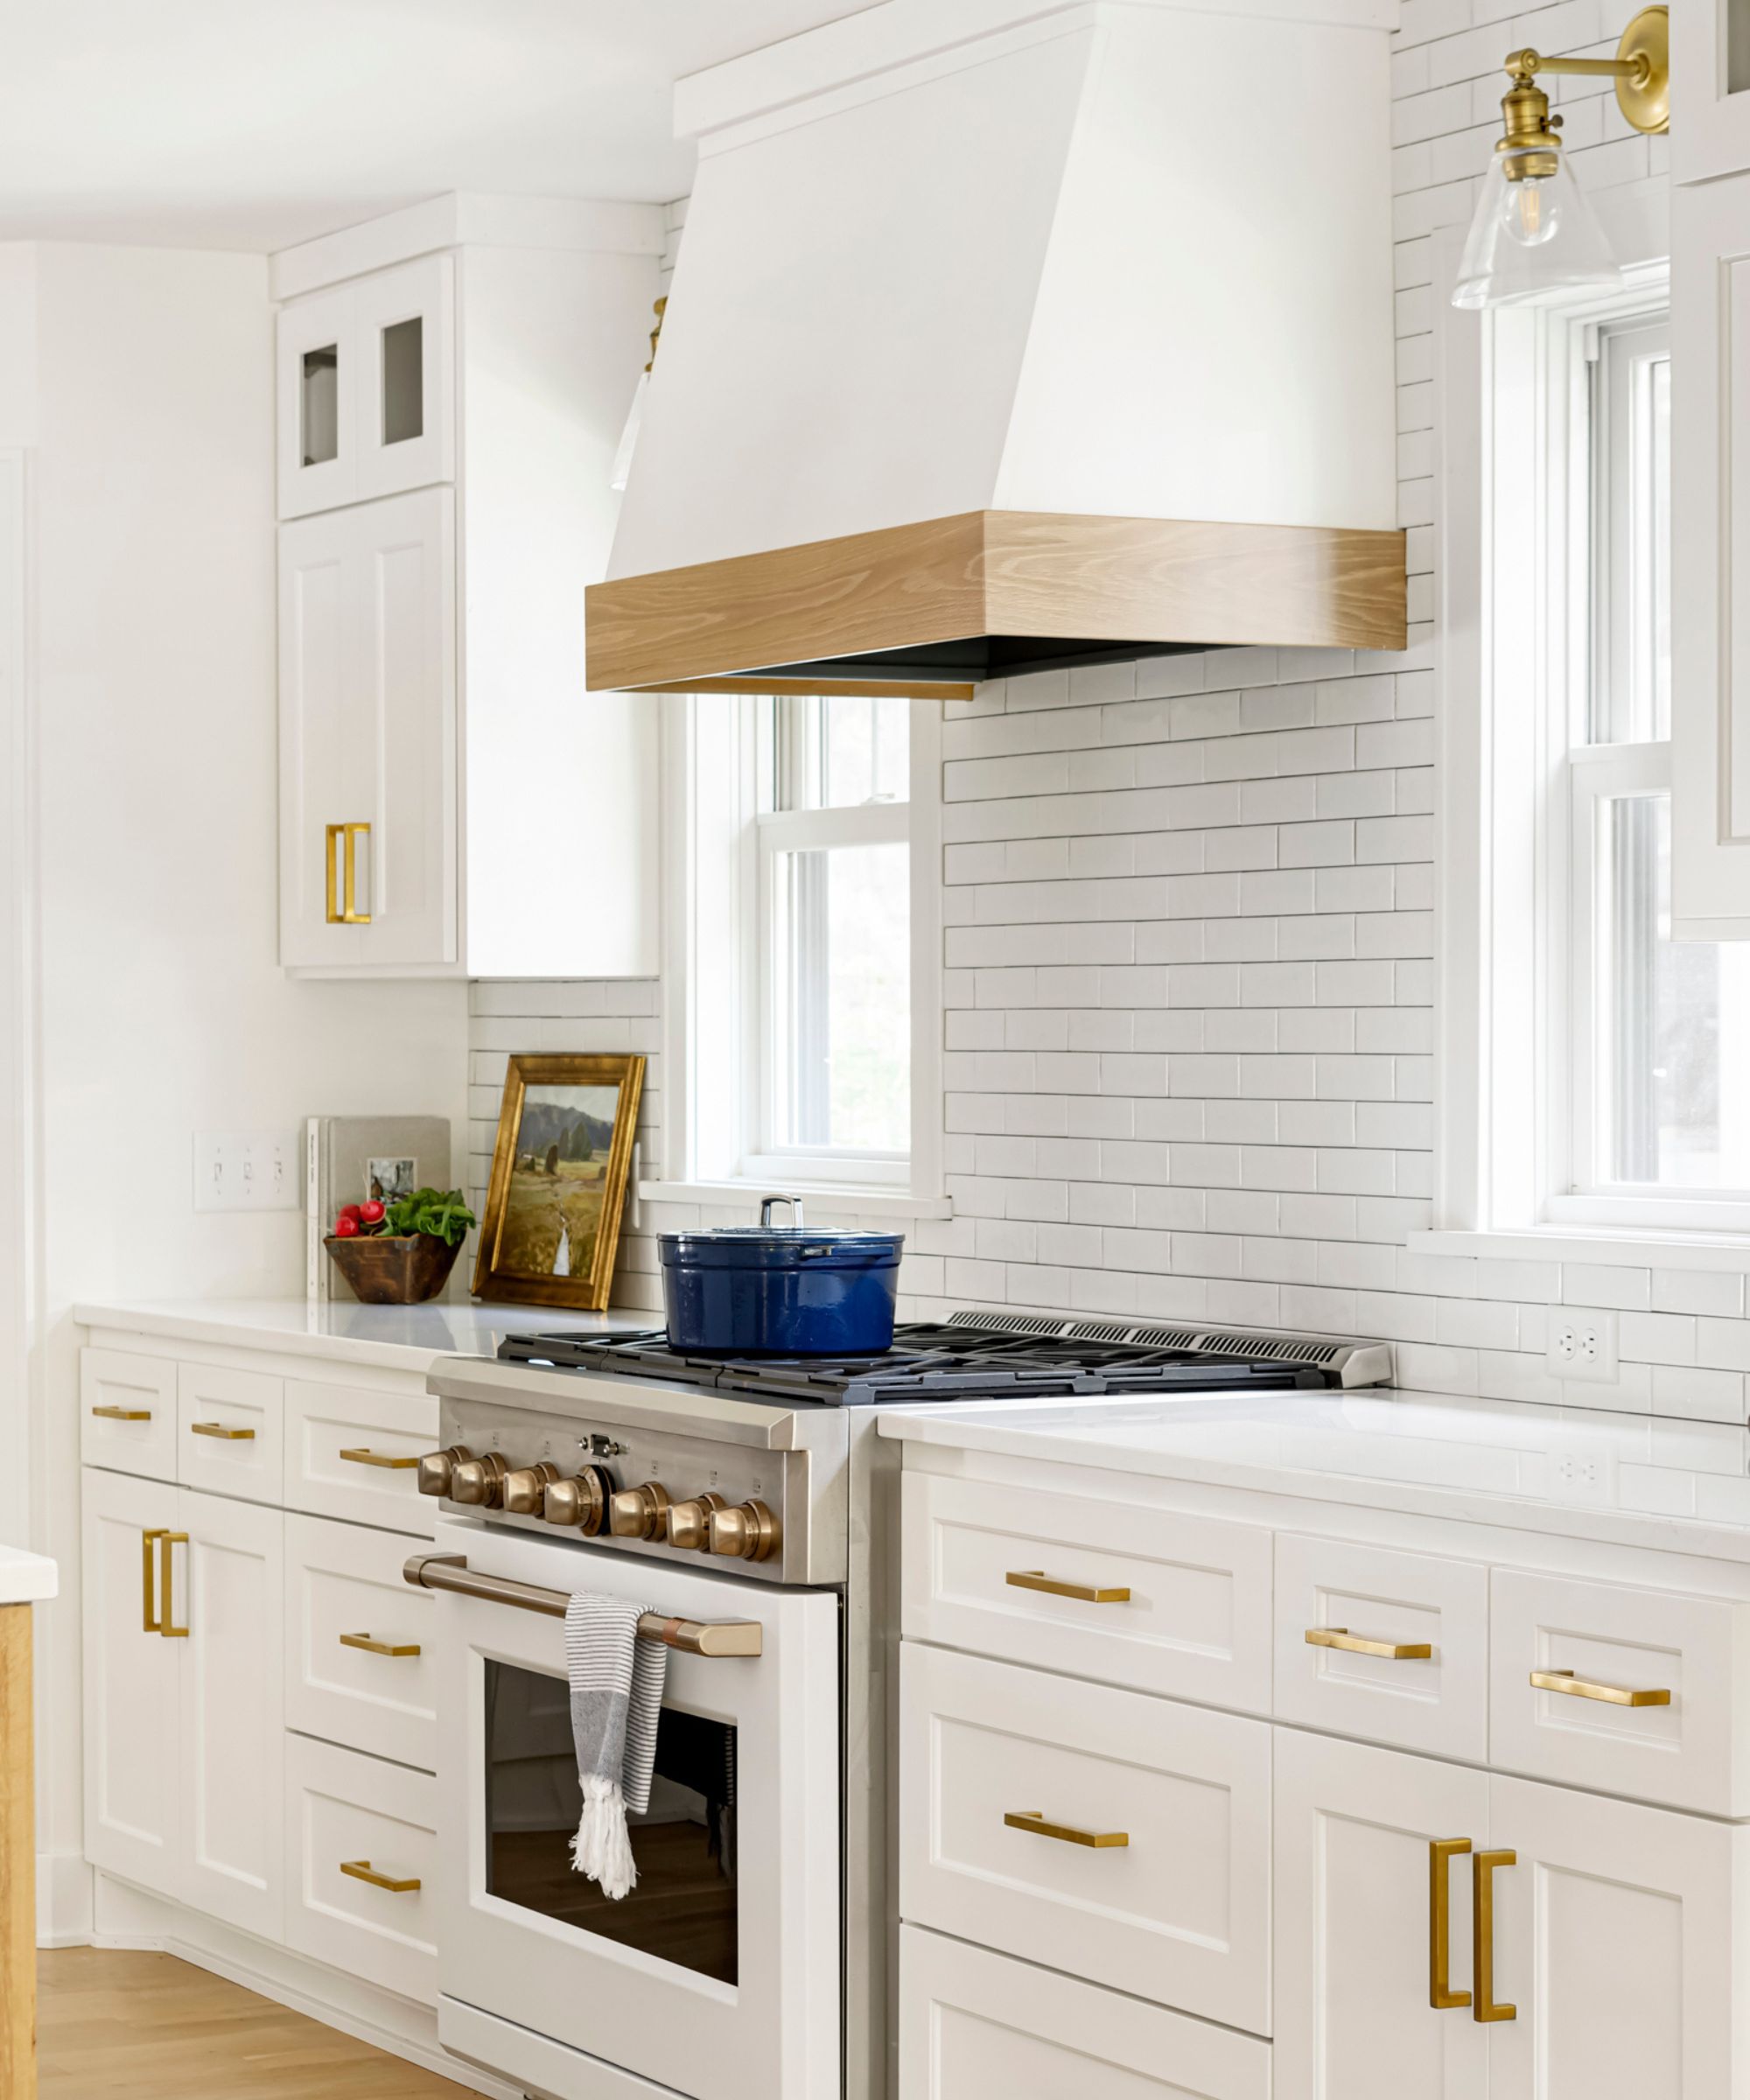 what colors work best in a kitchen with white appliances? interior designers suggest the most timeless schemes